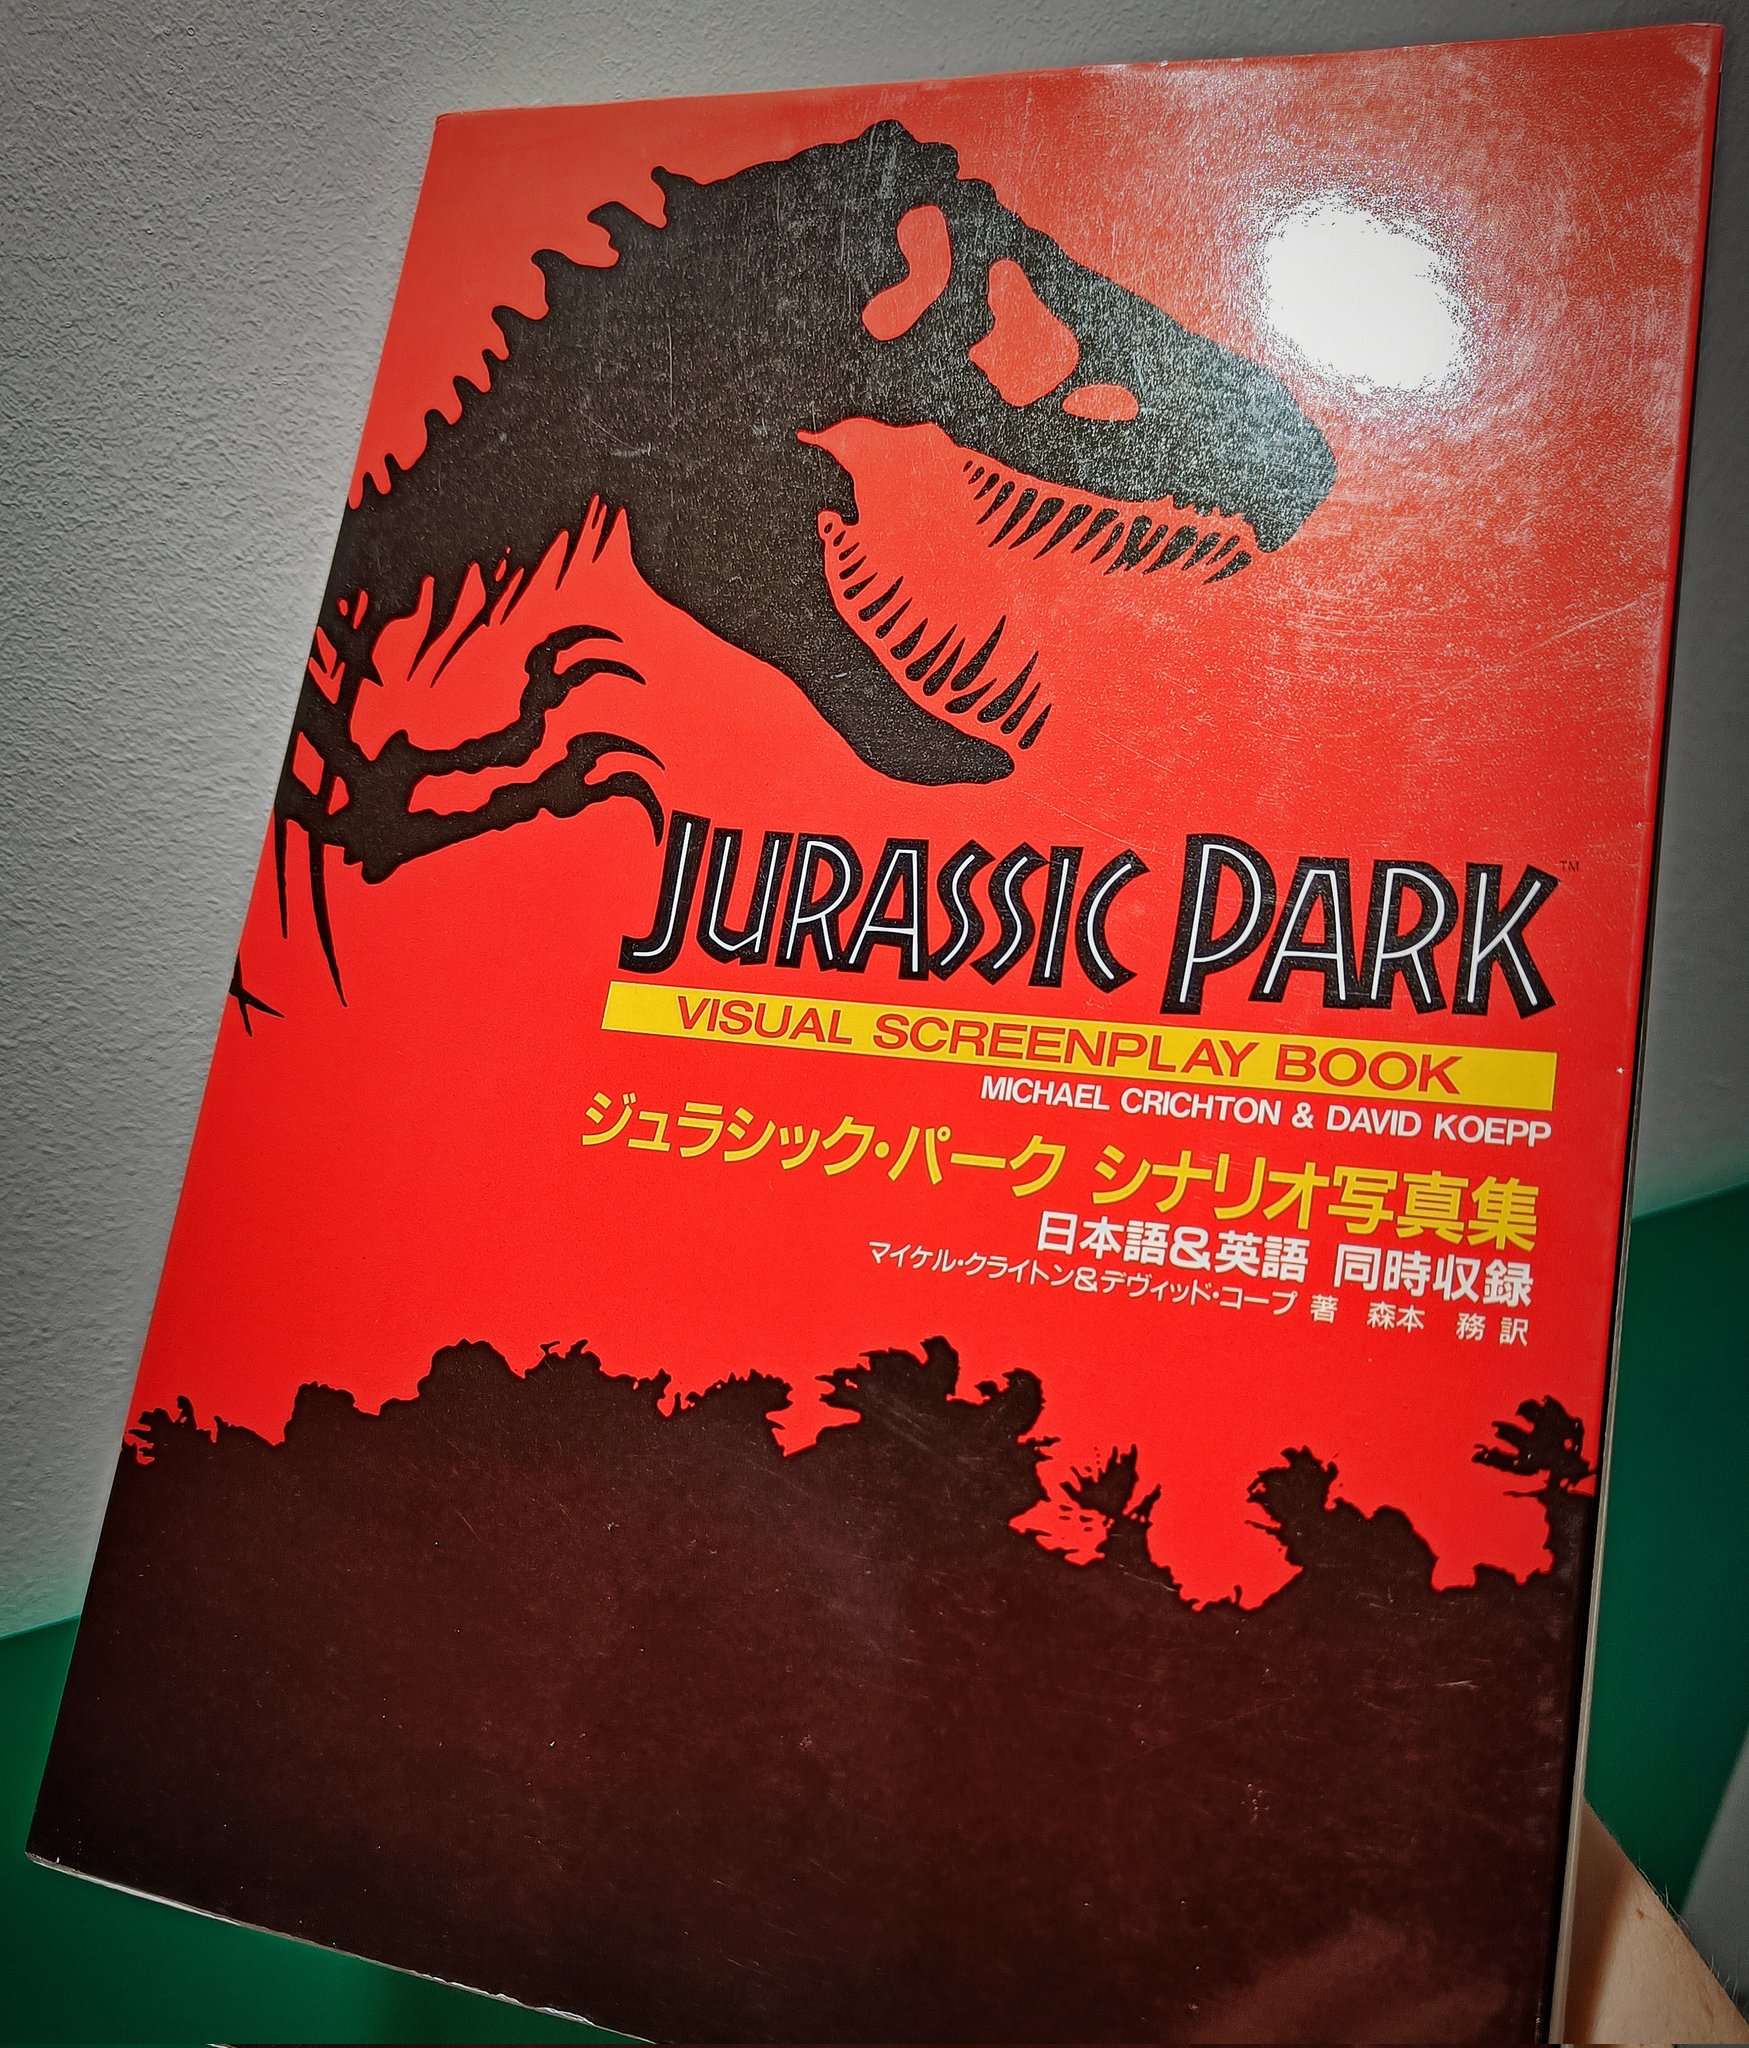 Jurassic Collectables on X: With the announcement of the upcoming # JurassicPark official script book, I thought I'd share this Japanese  'Visual Screenplay Book' from 1993. Features some great full page prints  from